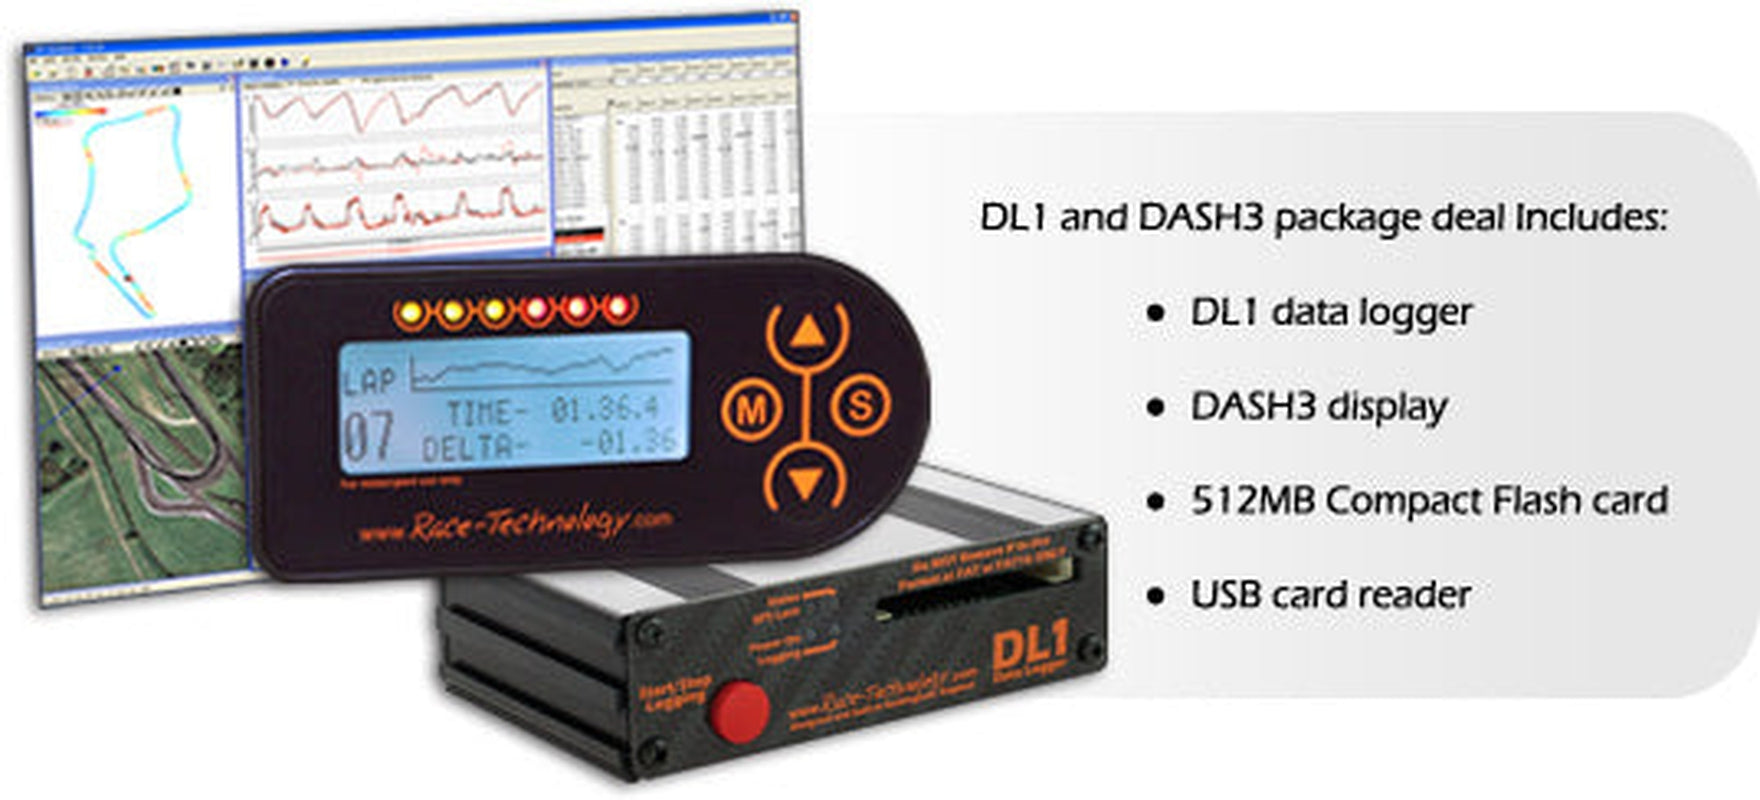 Race Technology DL1 and DASH3 Package Deal